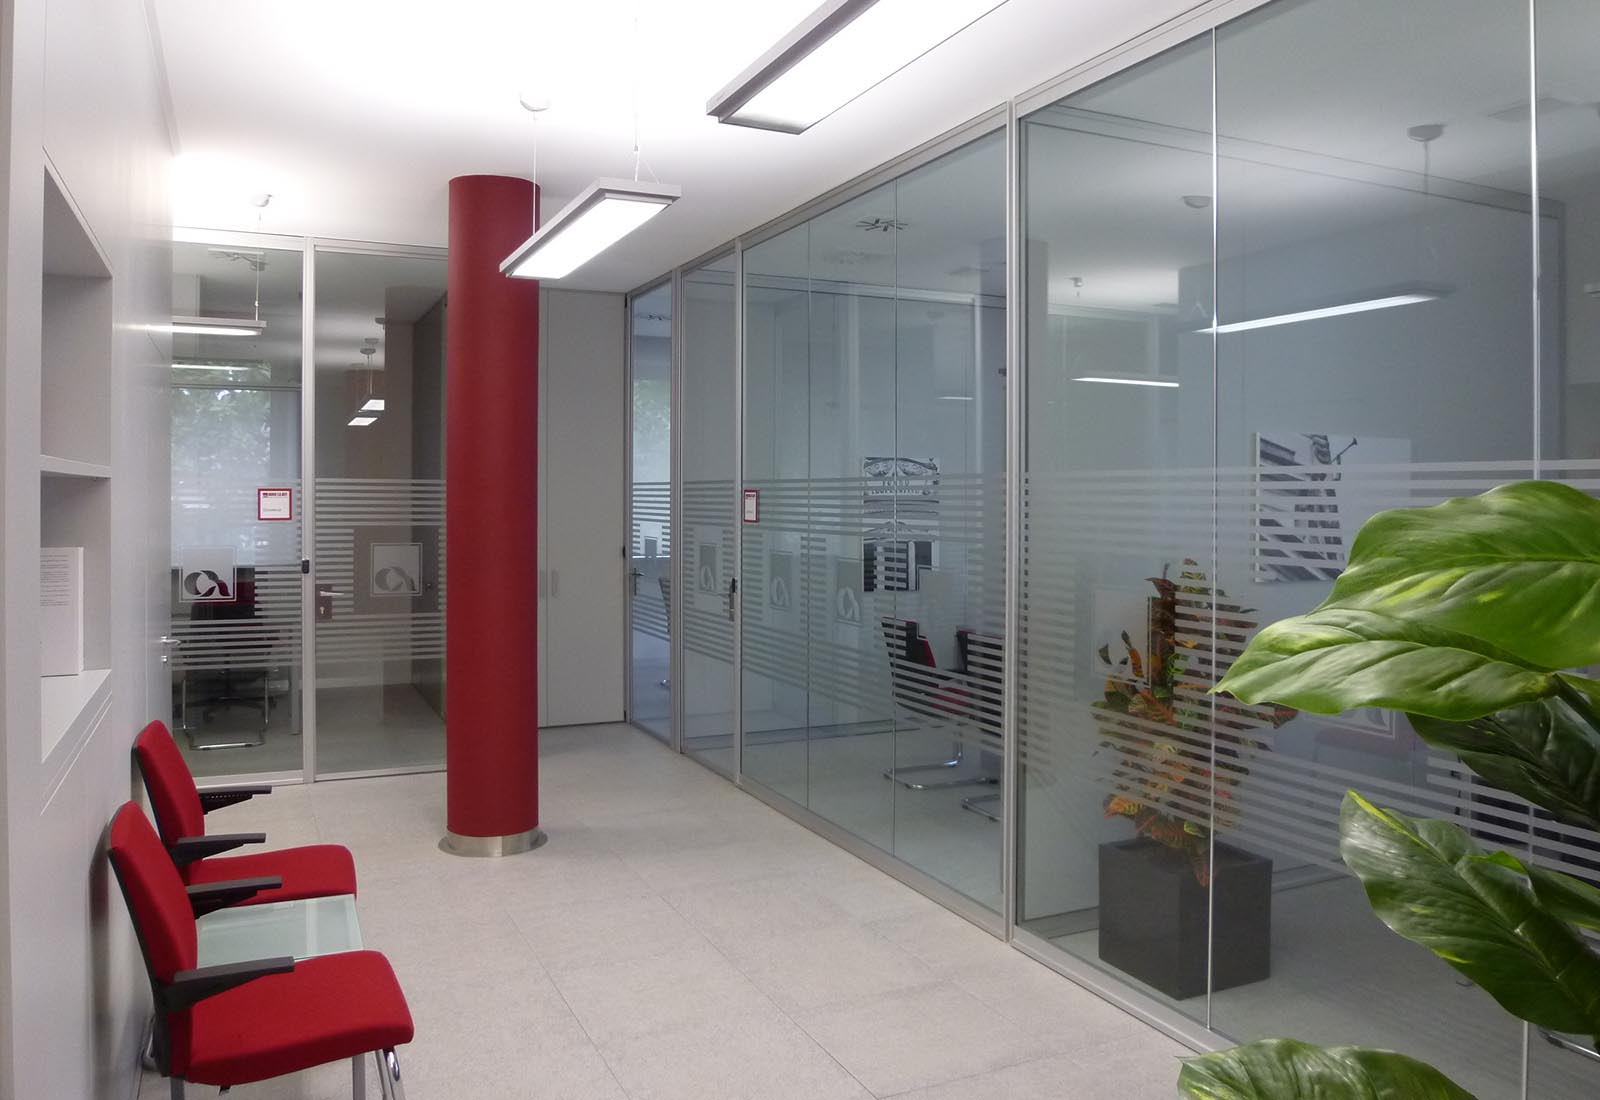 C.R.Asti Bank in Rho - The office area